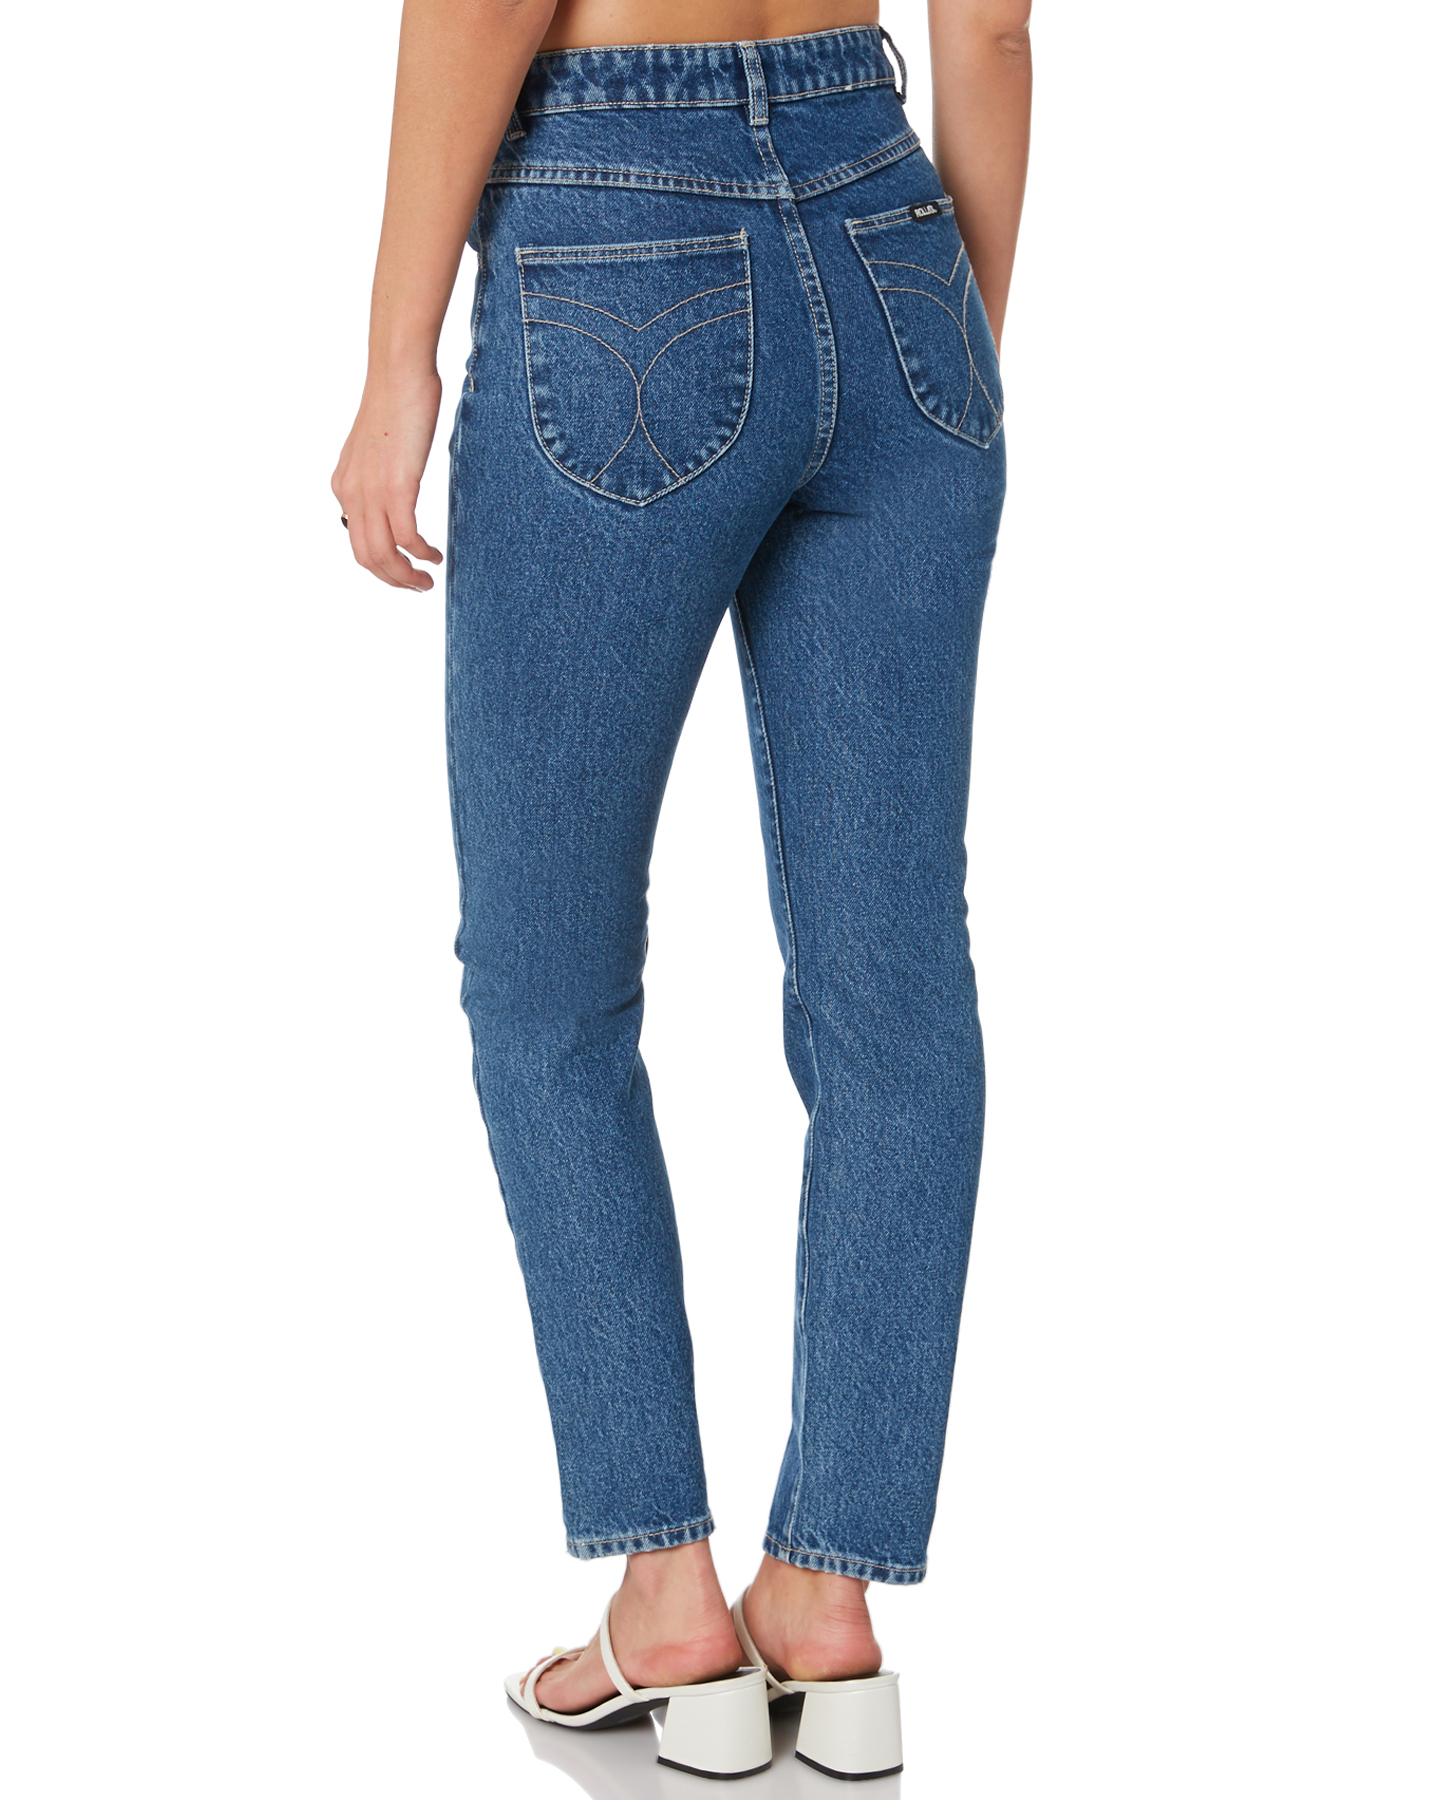 Rollas Dusters Jean - Authentic Stone | SurfStitch